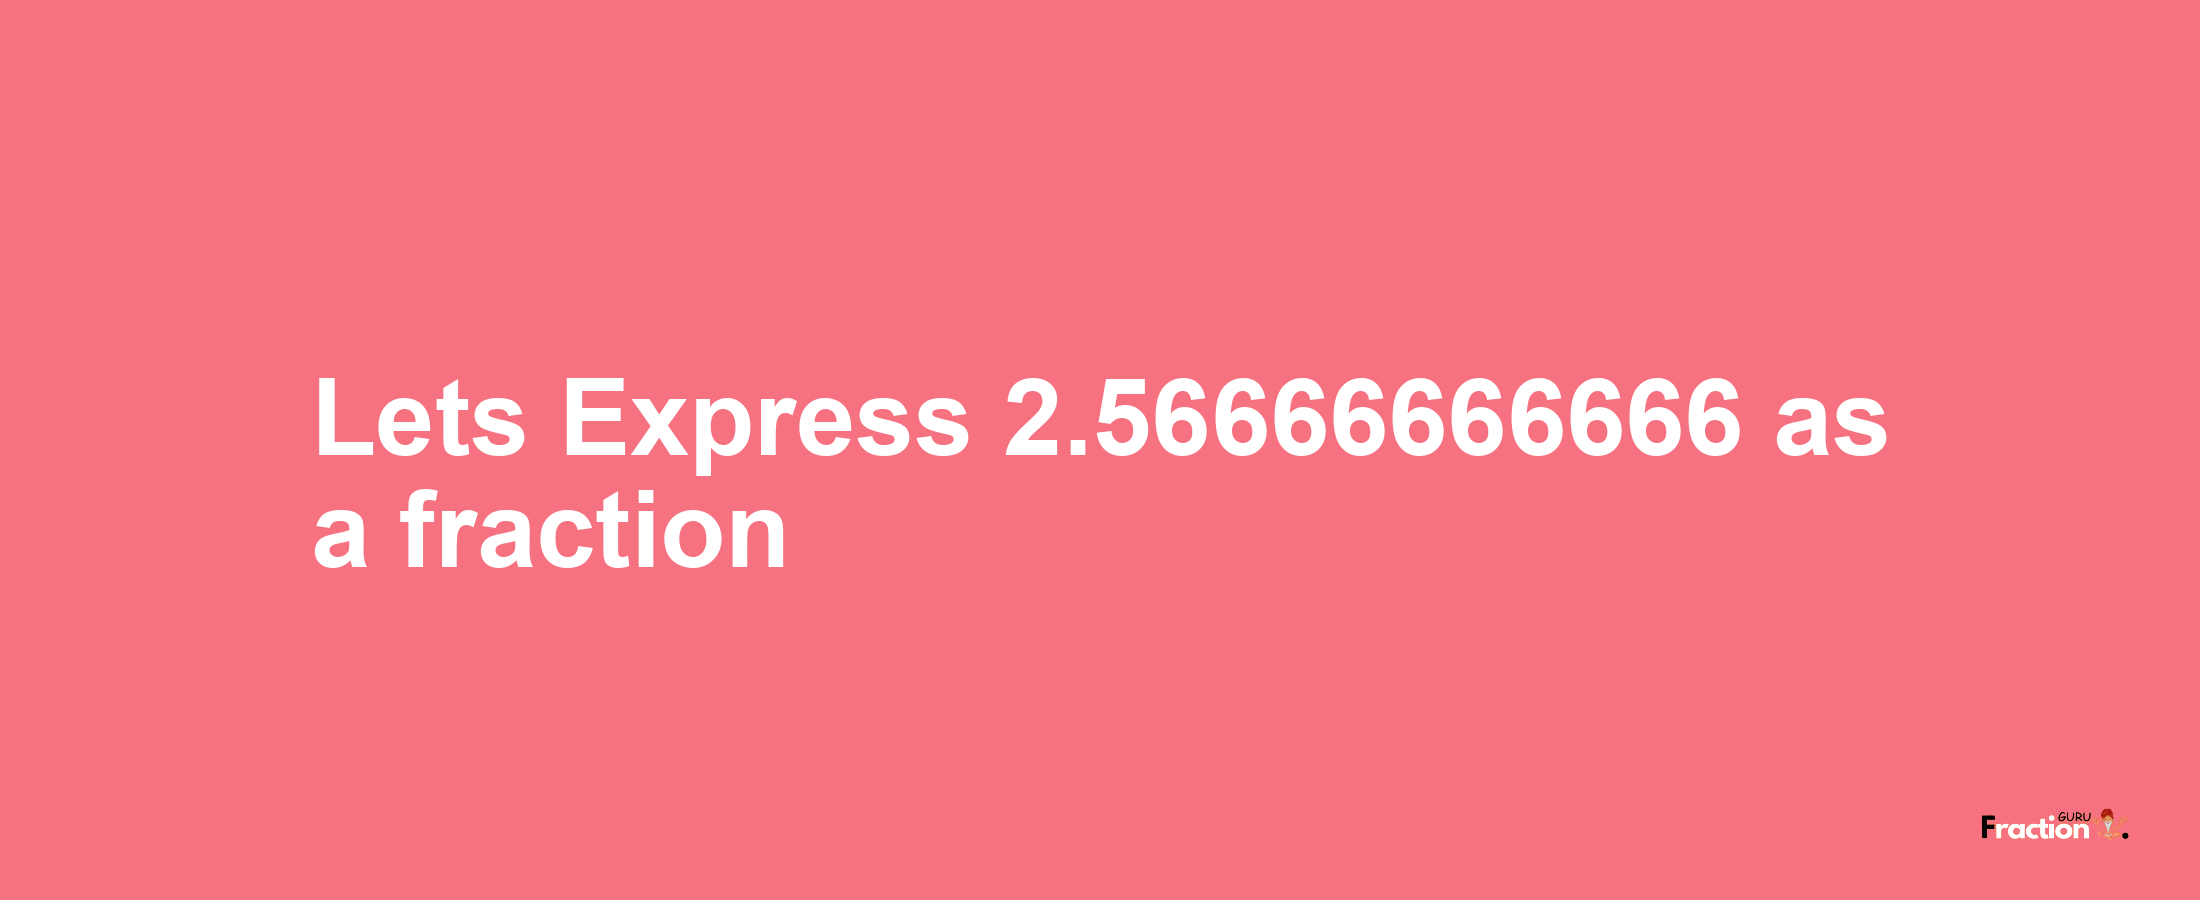 Lets Express 2.56666666666 as afraction